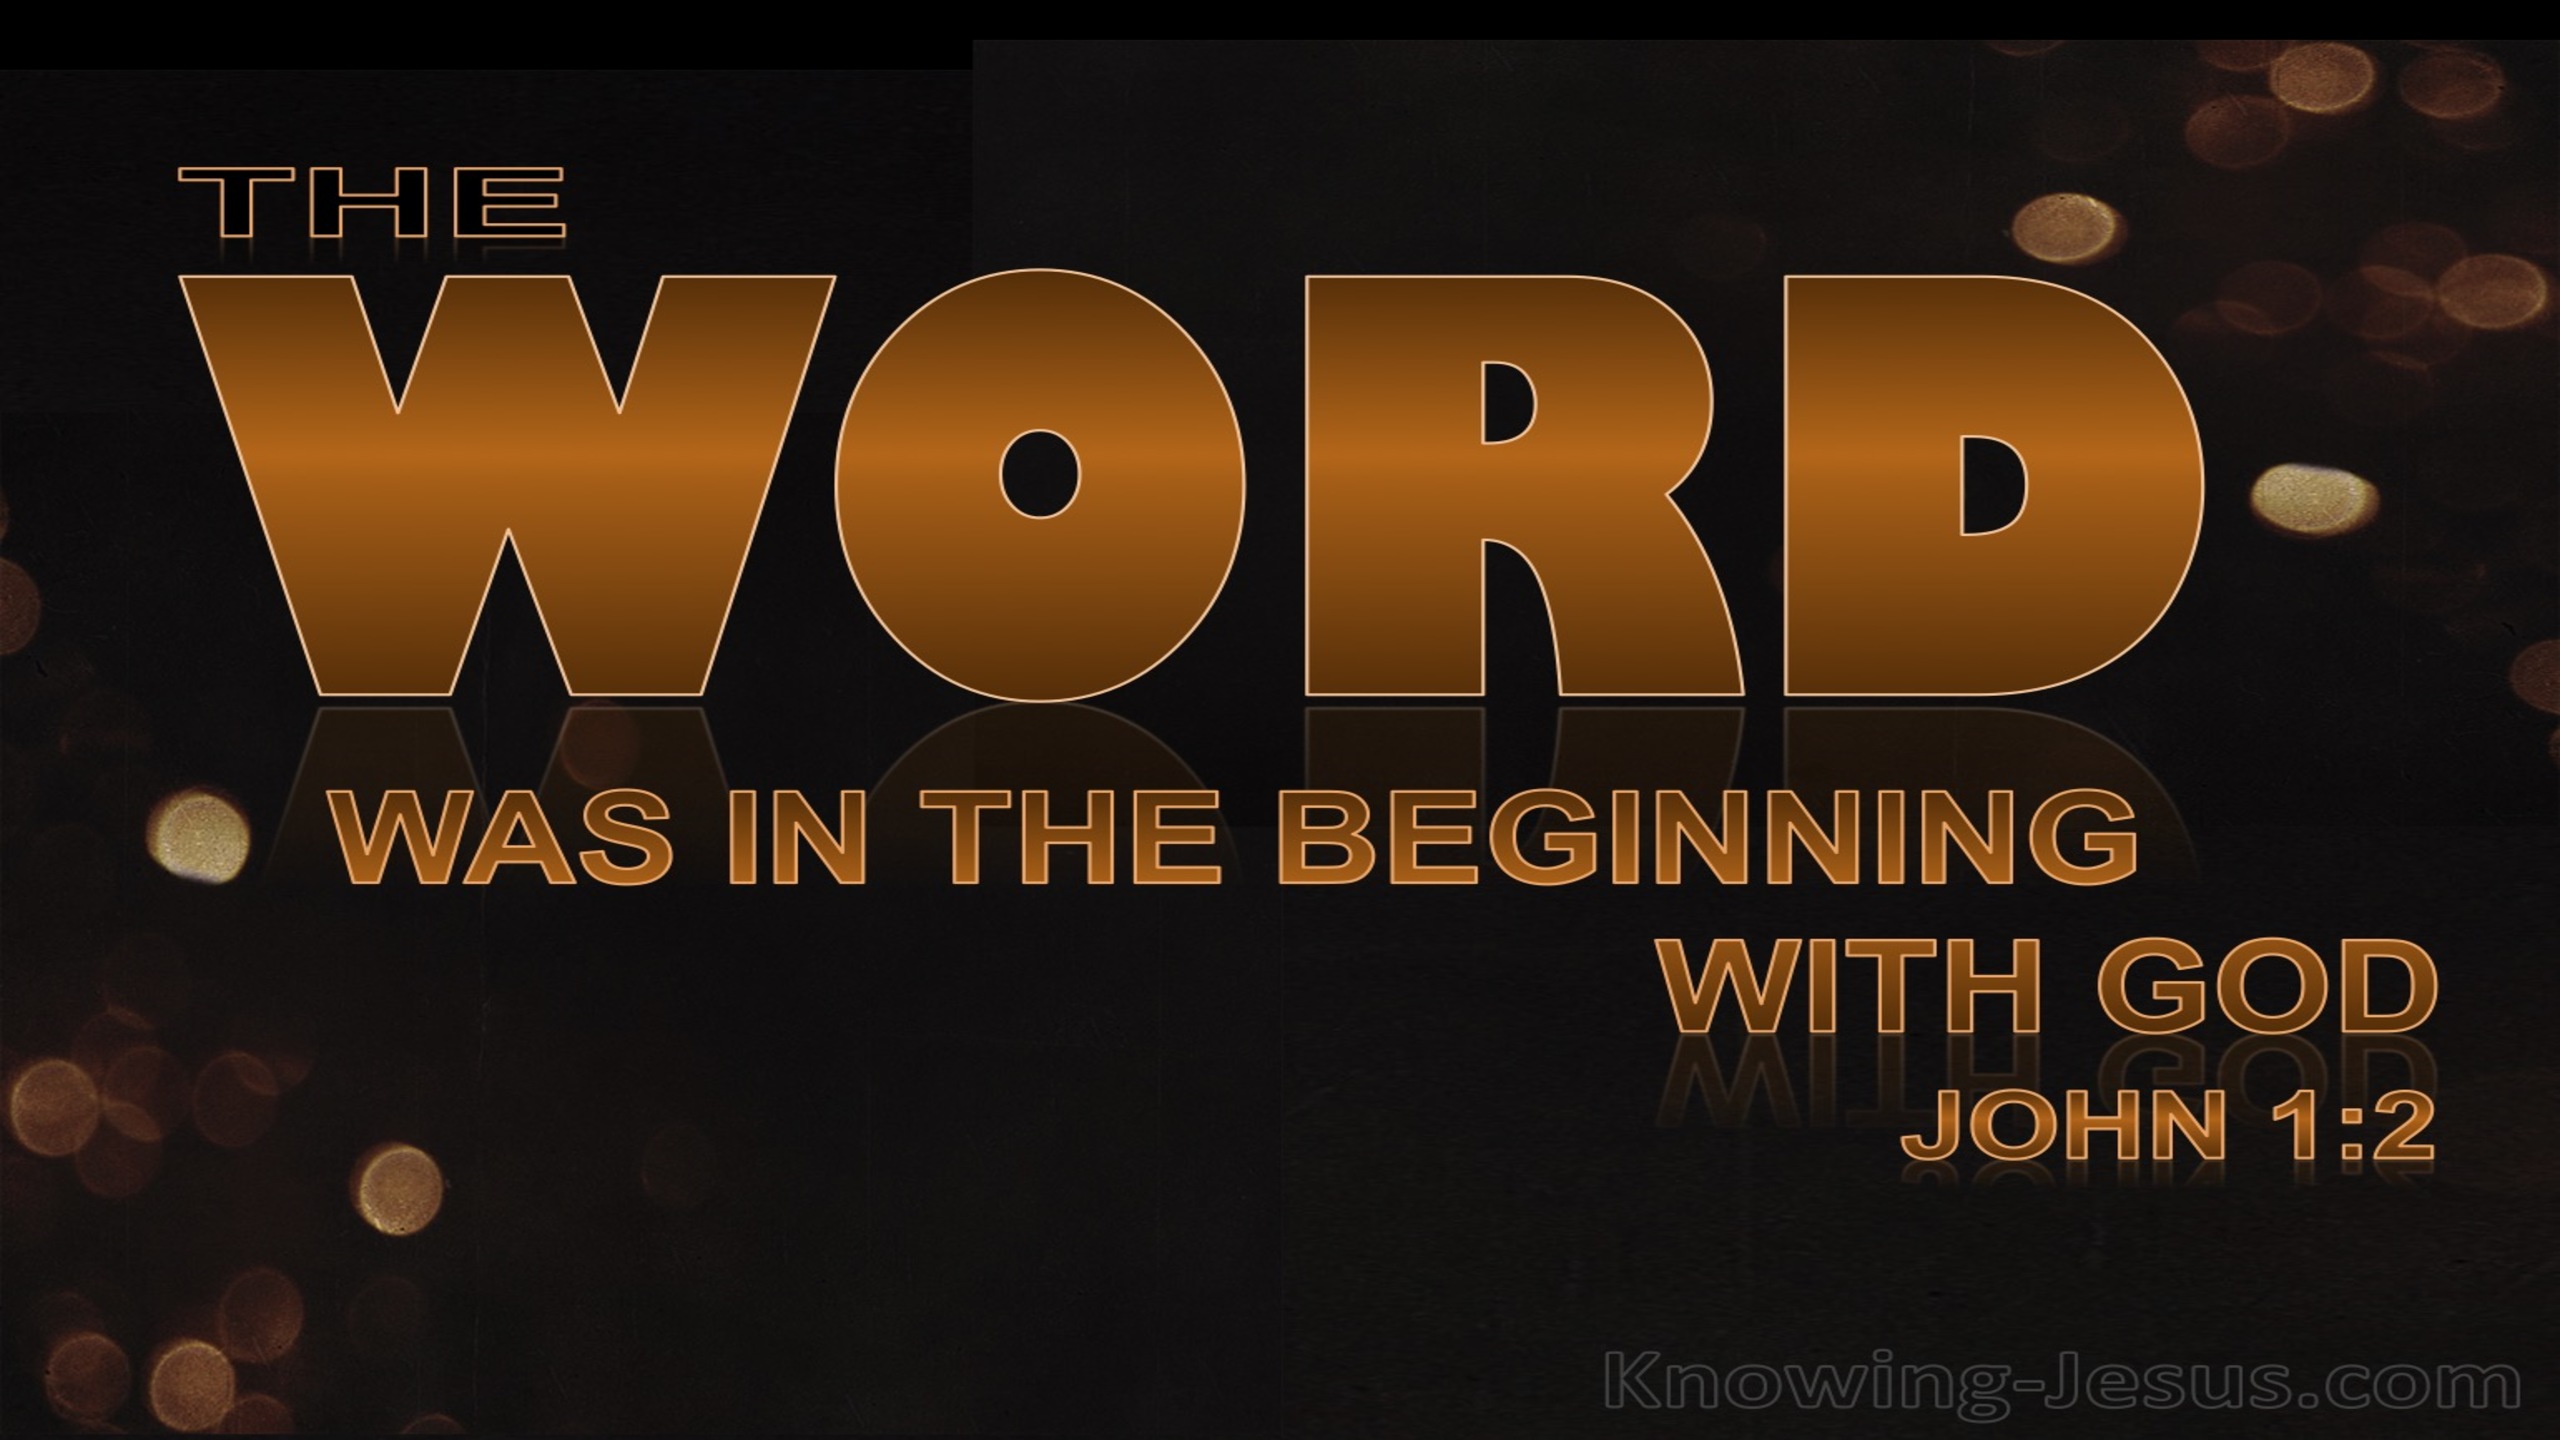 John 1:2 He Was In The Beginning With God tan